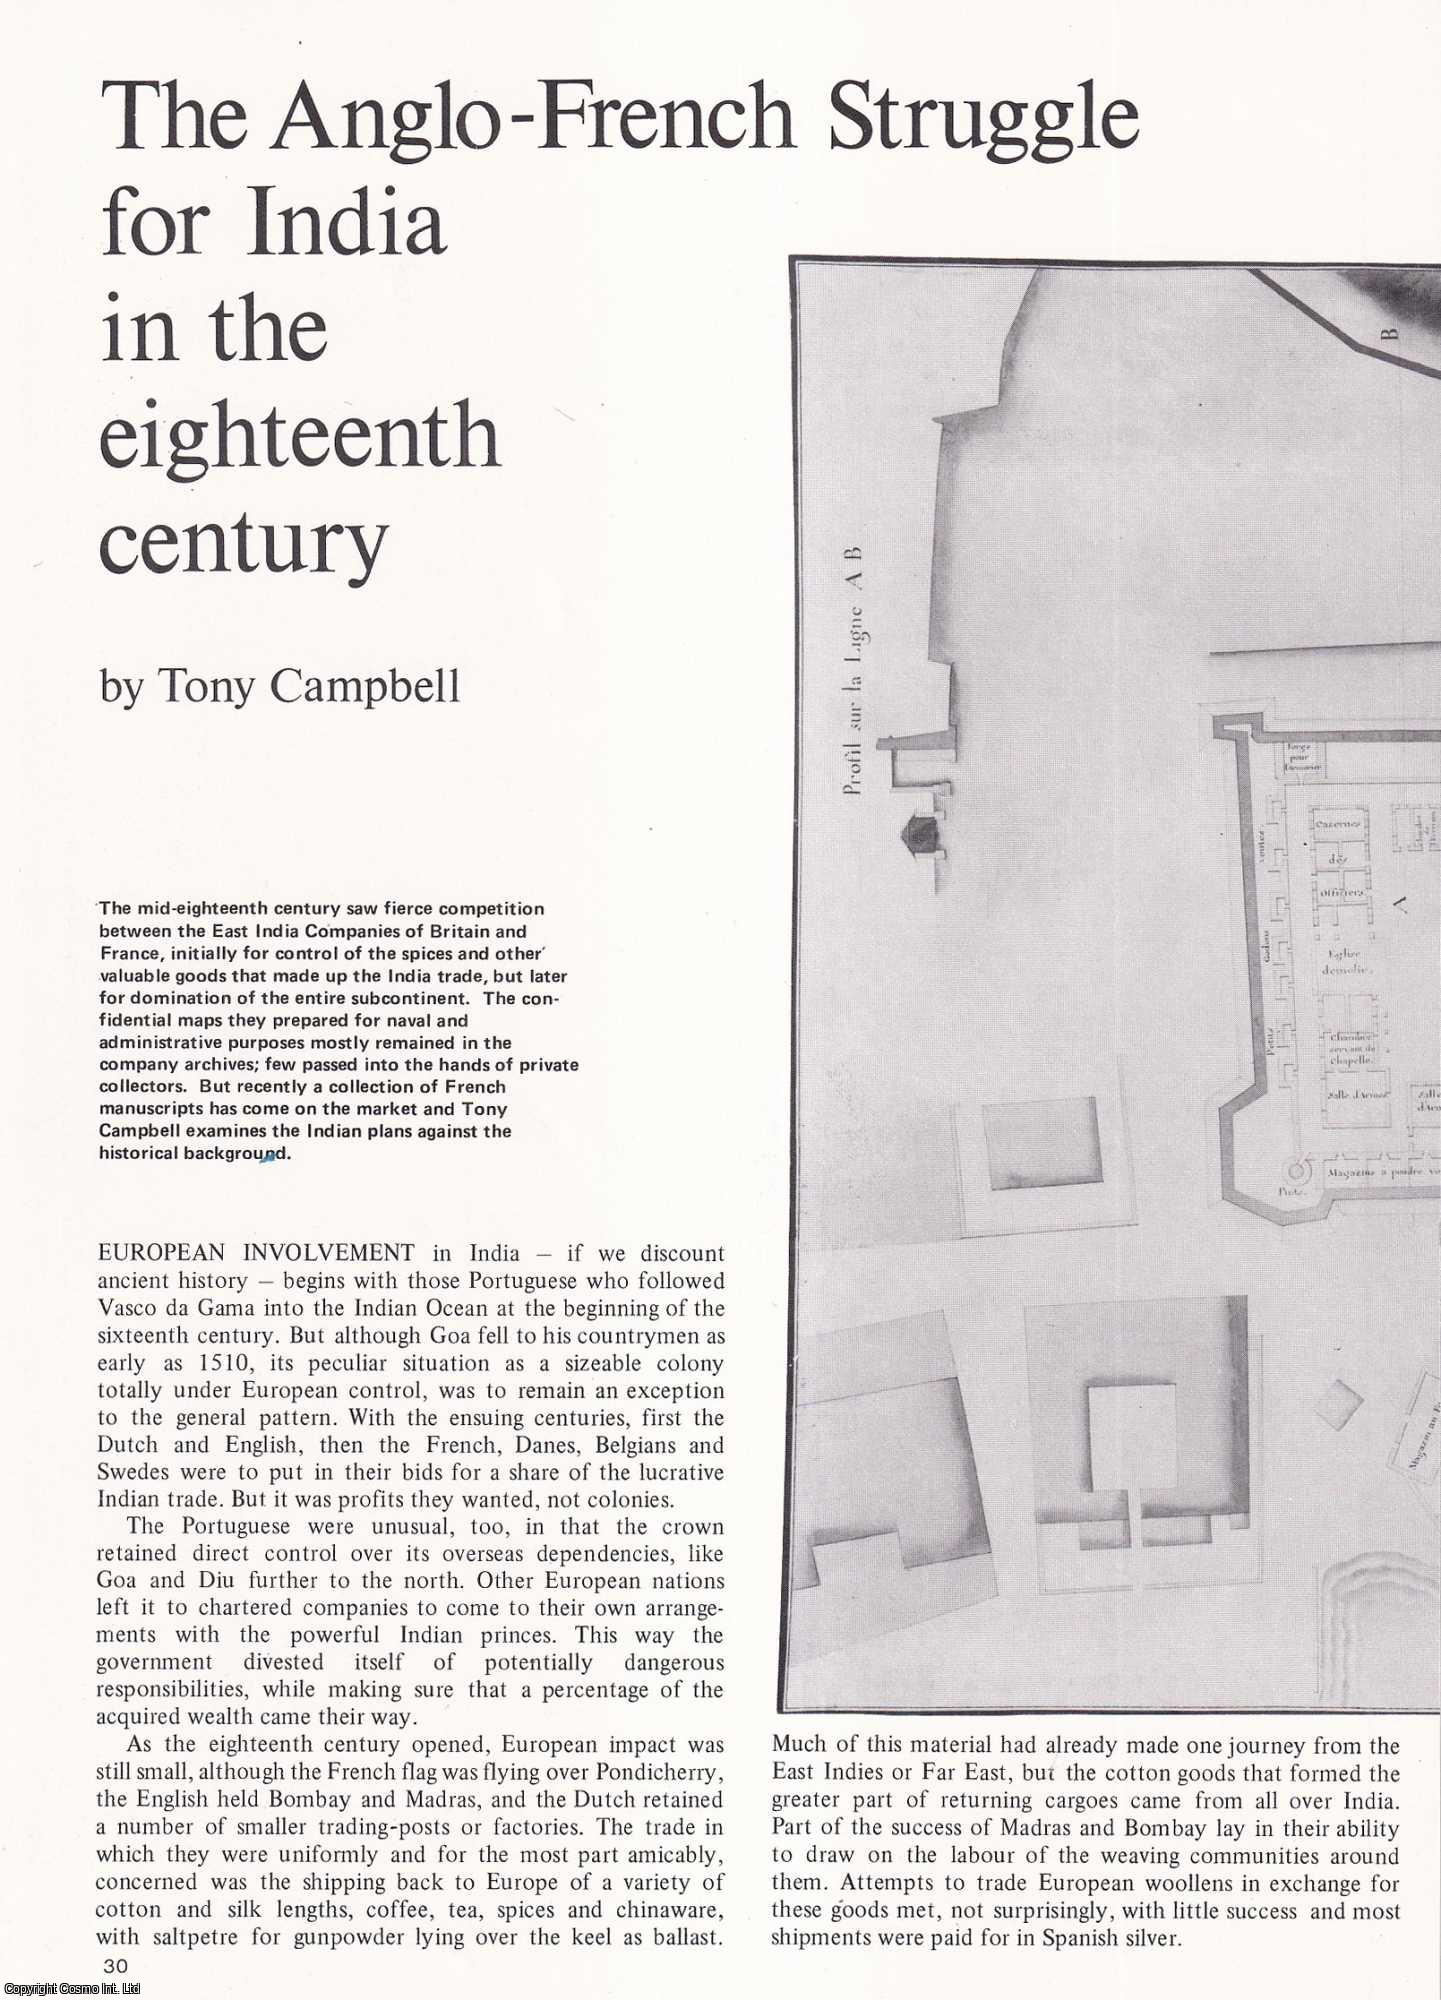 Tony Campbell - The Anglo-French Struggle for India in the Eighteenth Century. East India Companies' Maps. An original article from Map Collector Magazine, 1978.